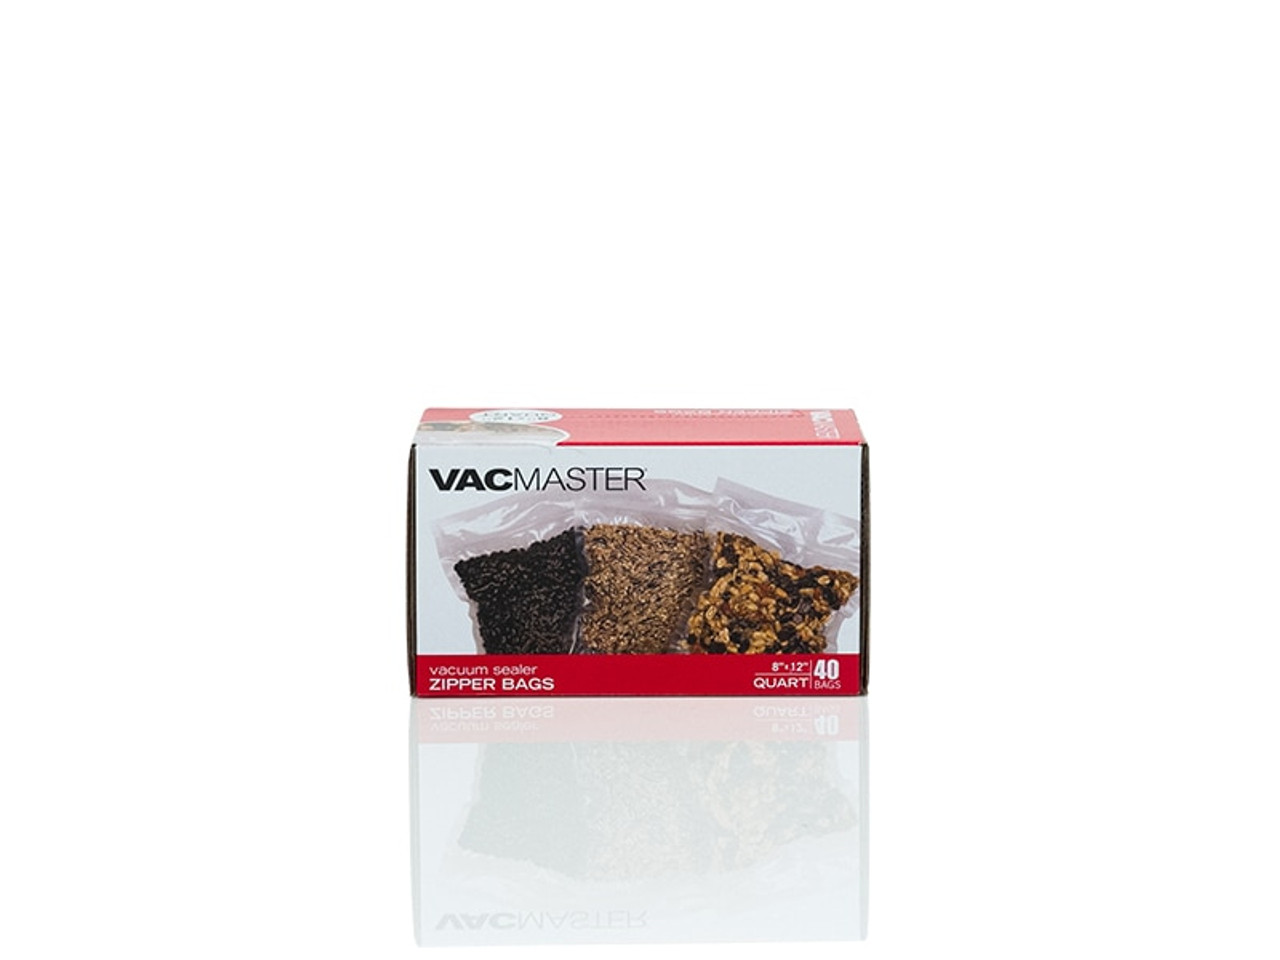 How do I know which bags, rolls or pouches are best to use? - VacMaster